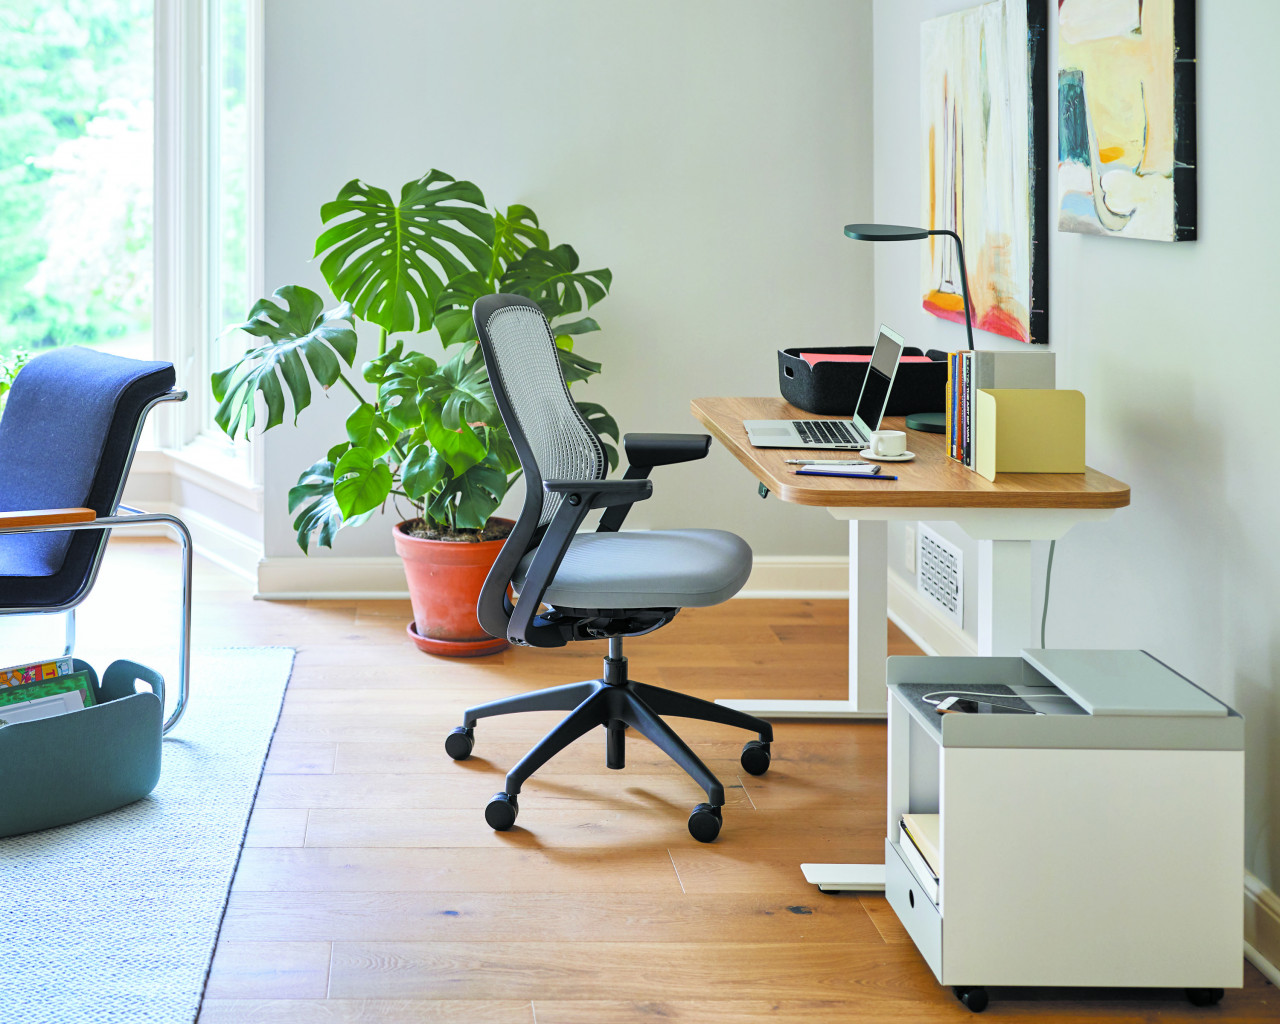 Knoll Hipso Height-Adjustable Desk Rises to the Occasion